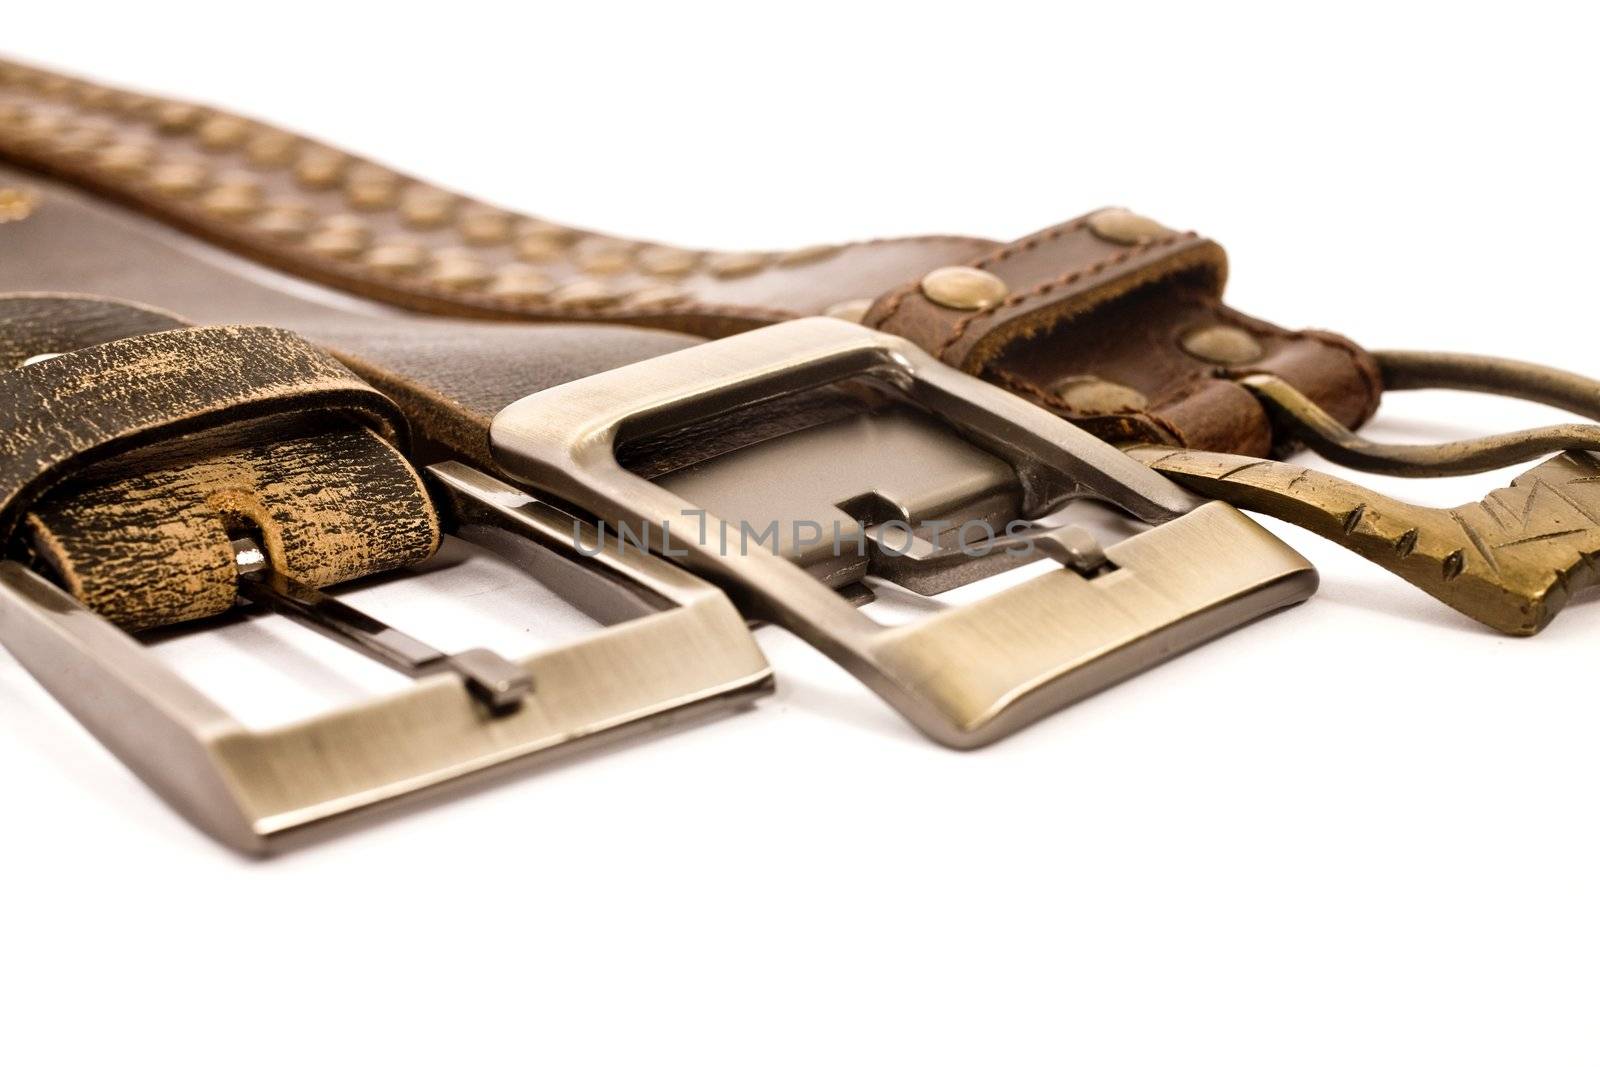 belts and buckles on isolated background
